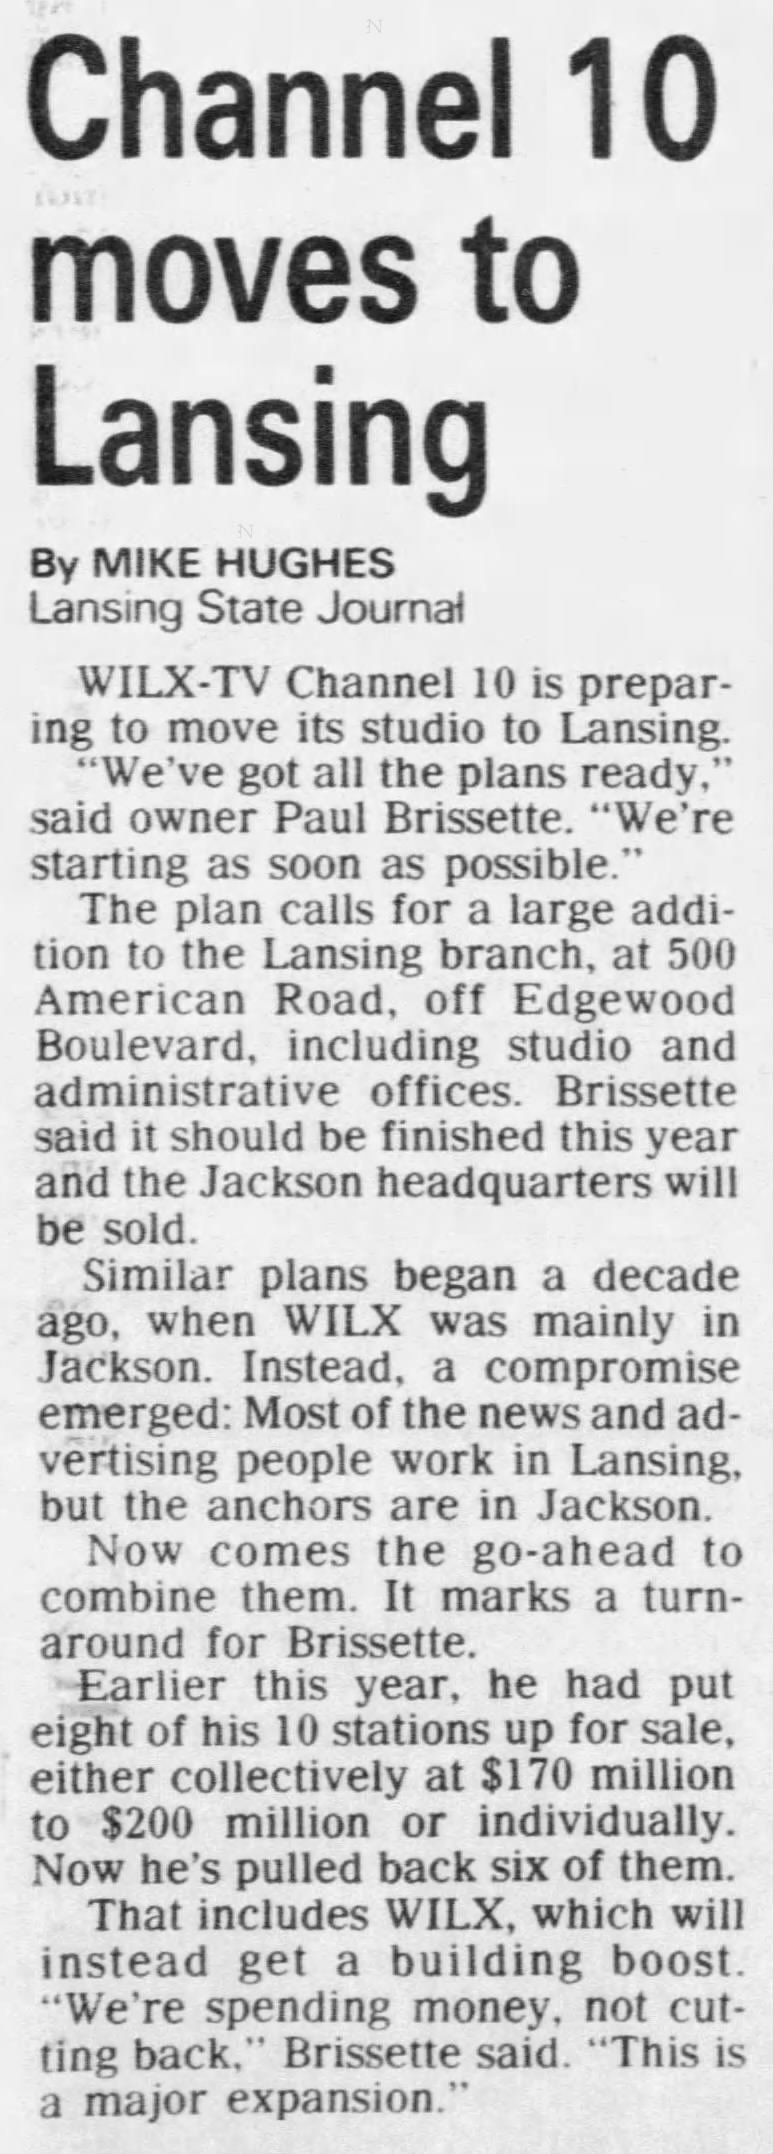 Channel 10 moves to Lansing